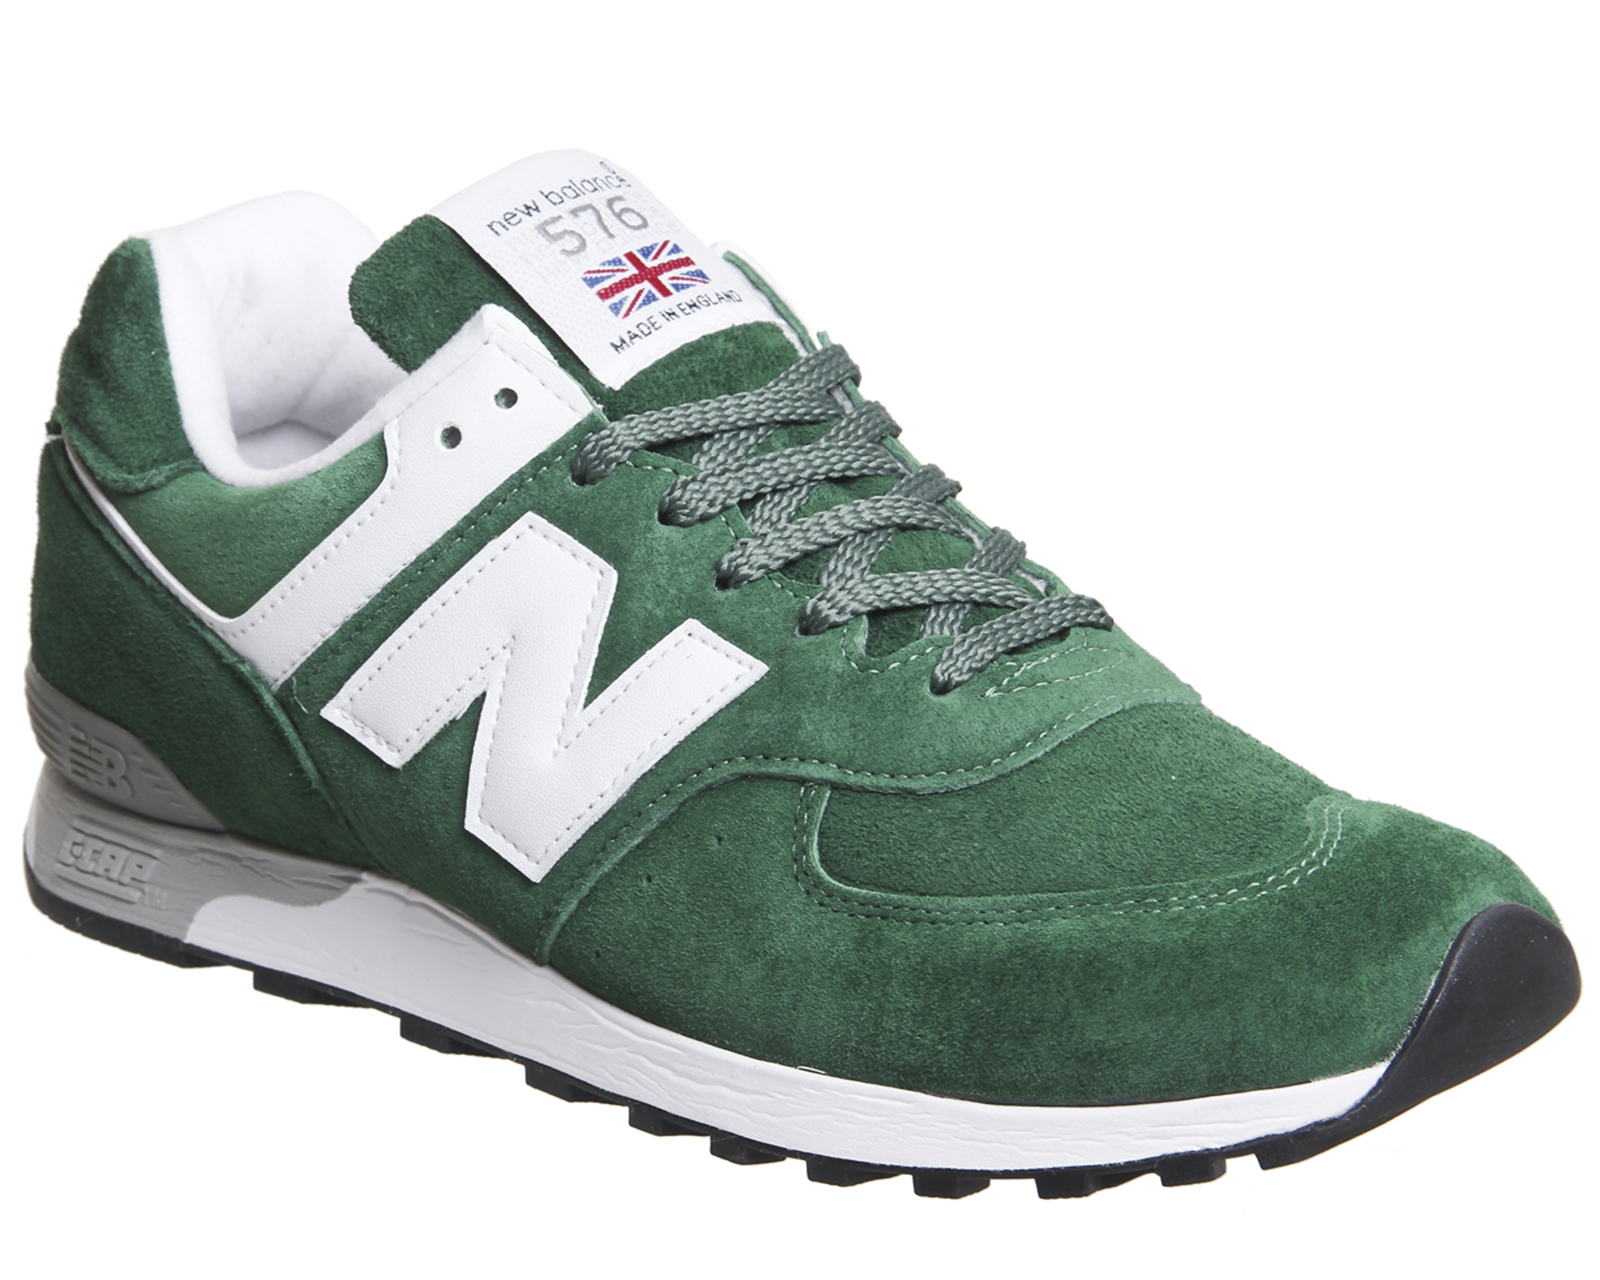 new balance 576 green suede